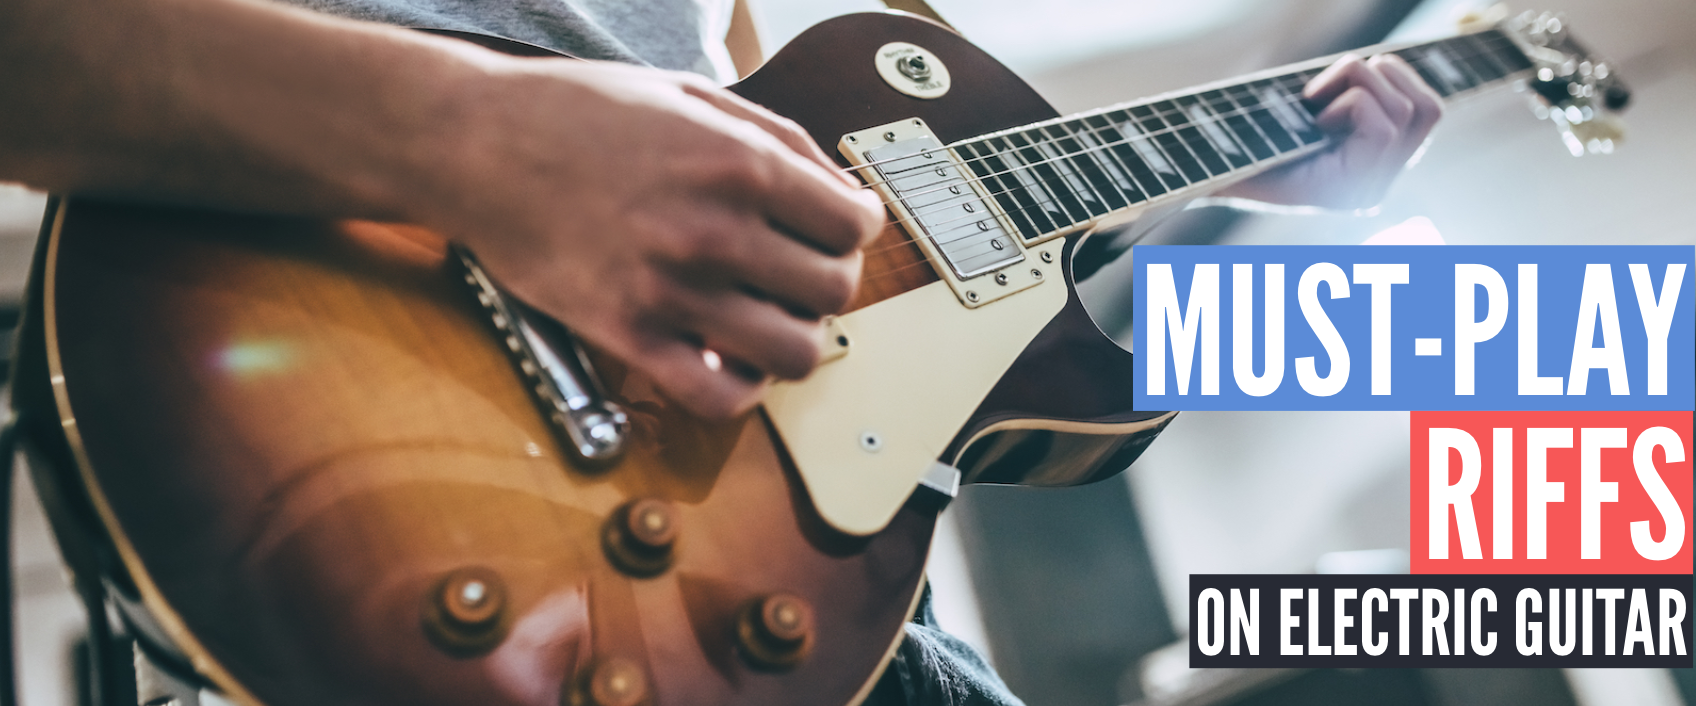 20 easy rock songs to get you started on the guitar - Guitar Pro